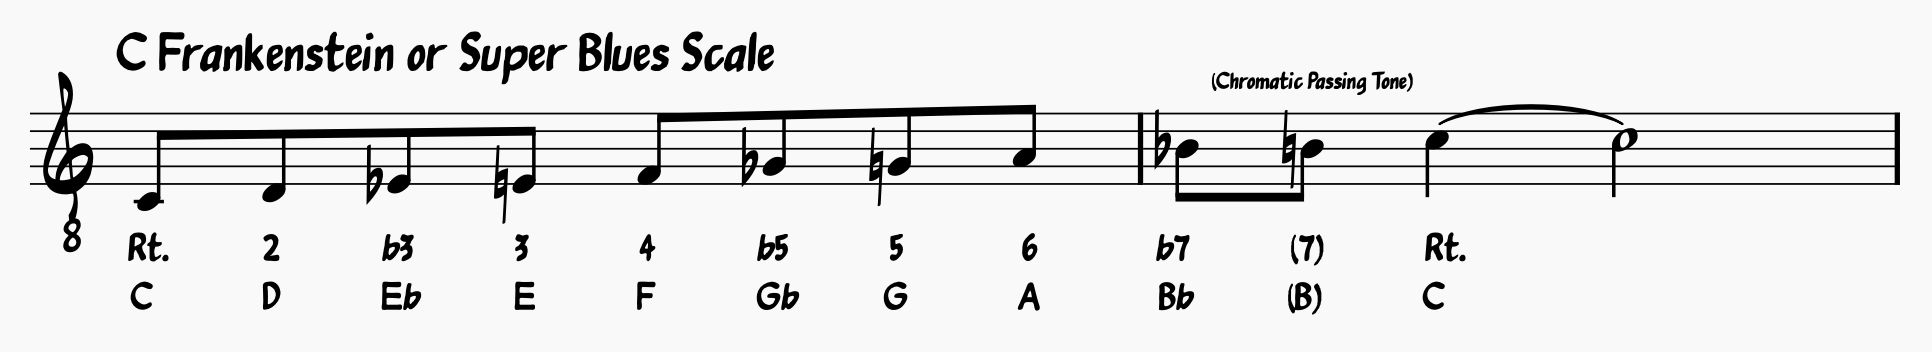 Blues Scale Guide: C Frankenstein or Super Blues Scale